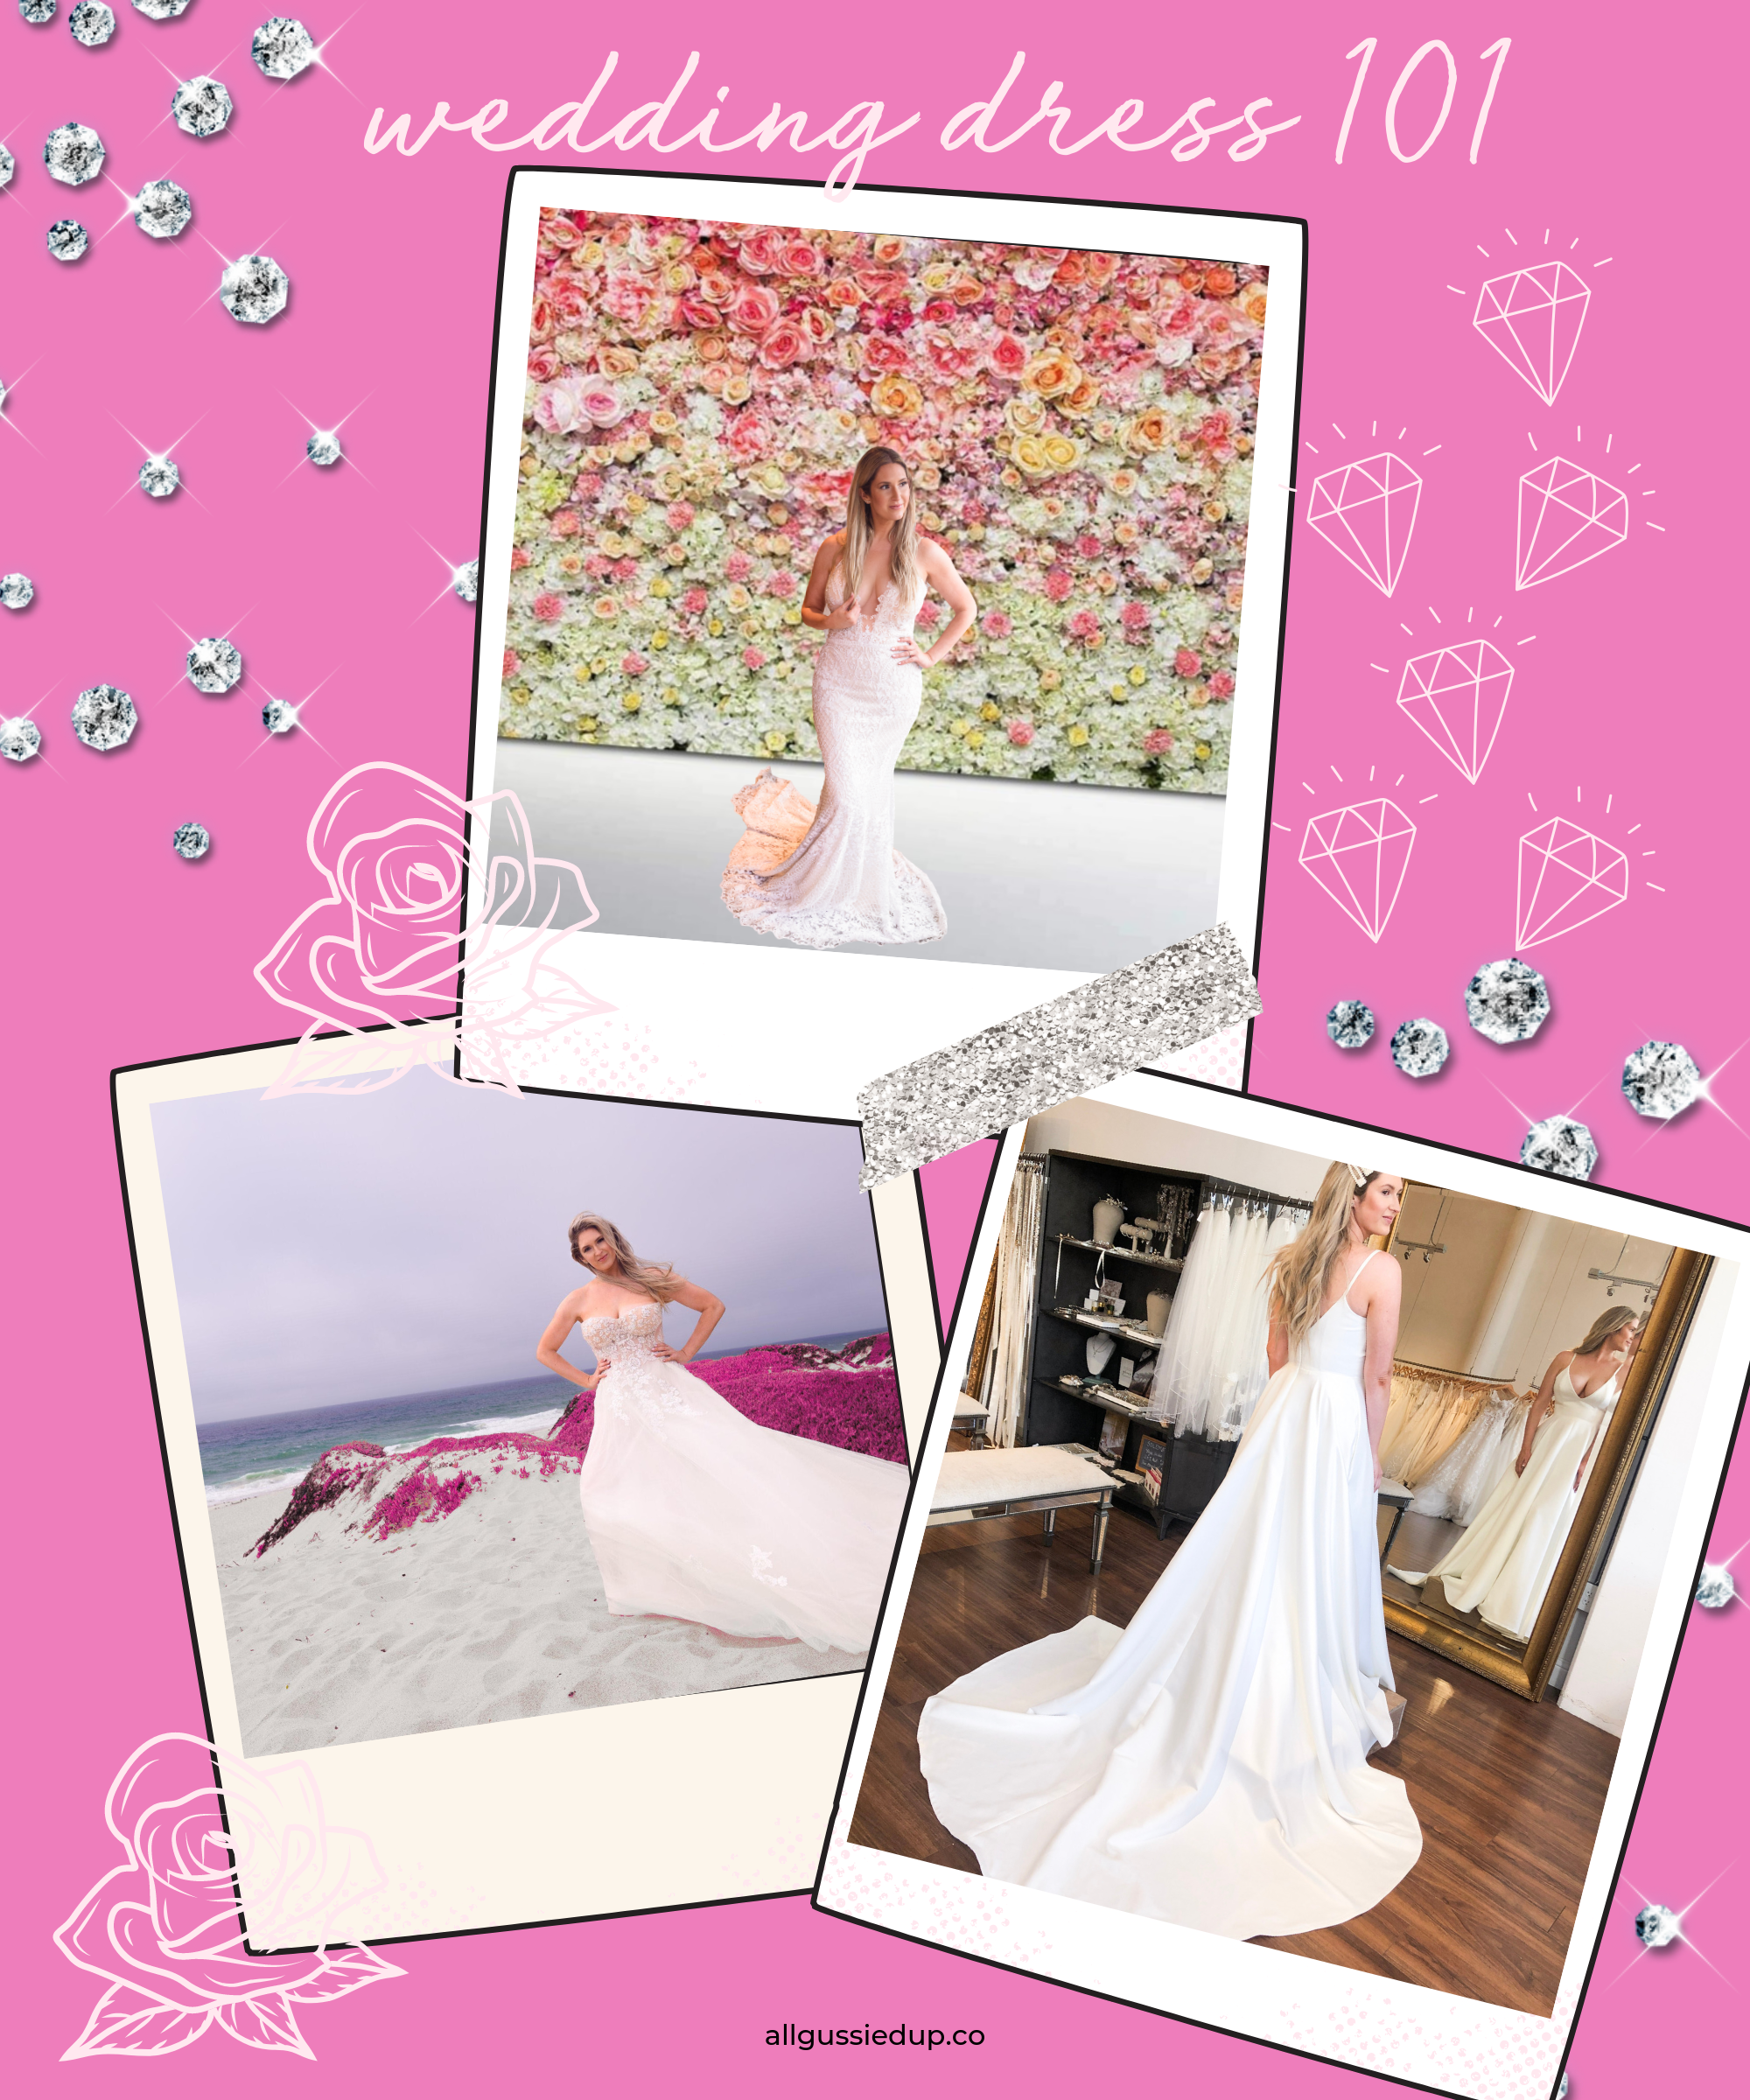 How To Choose Your Wedding Dress